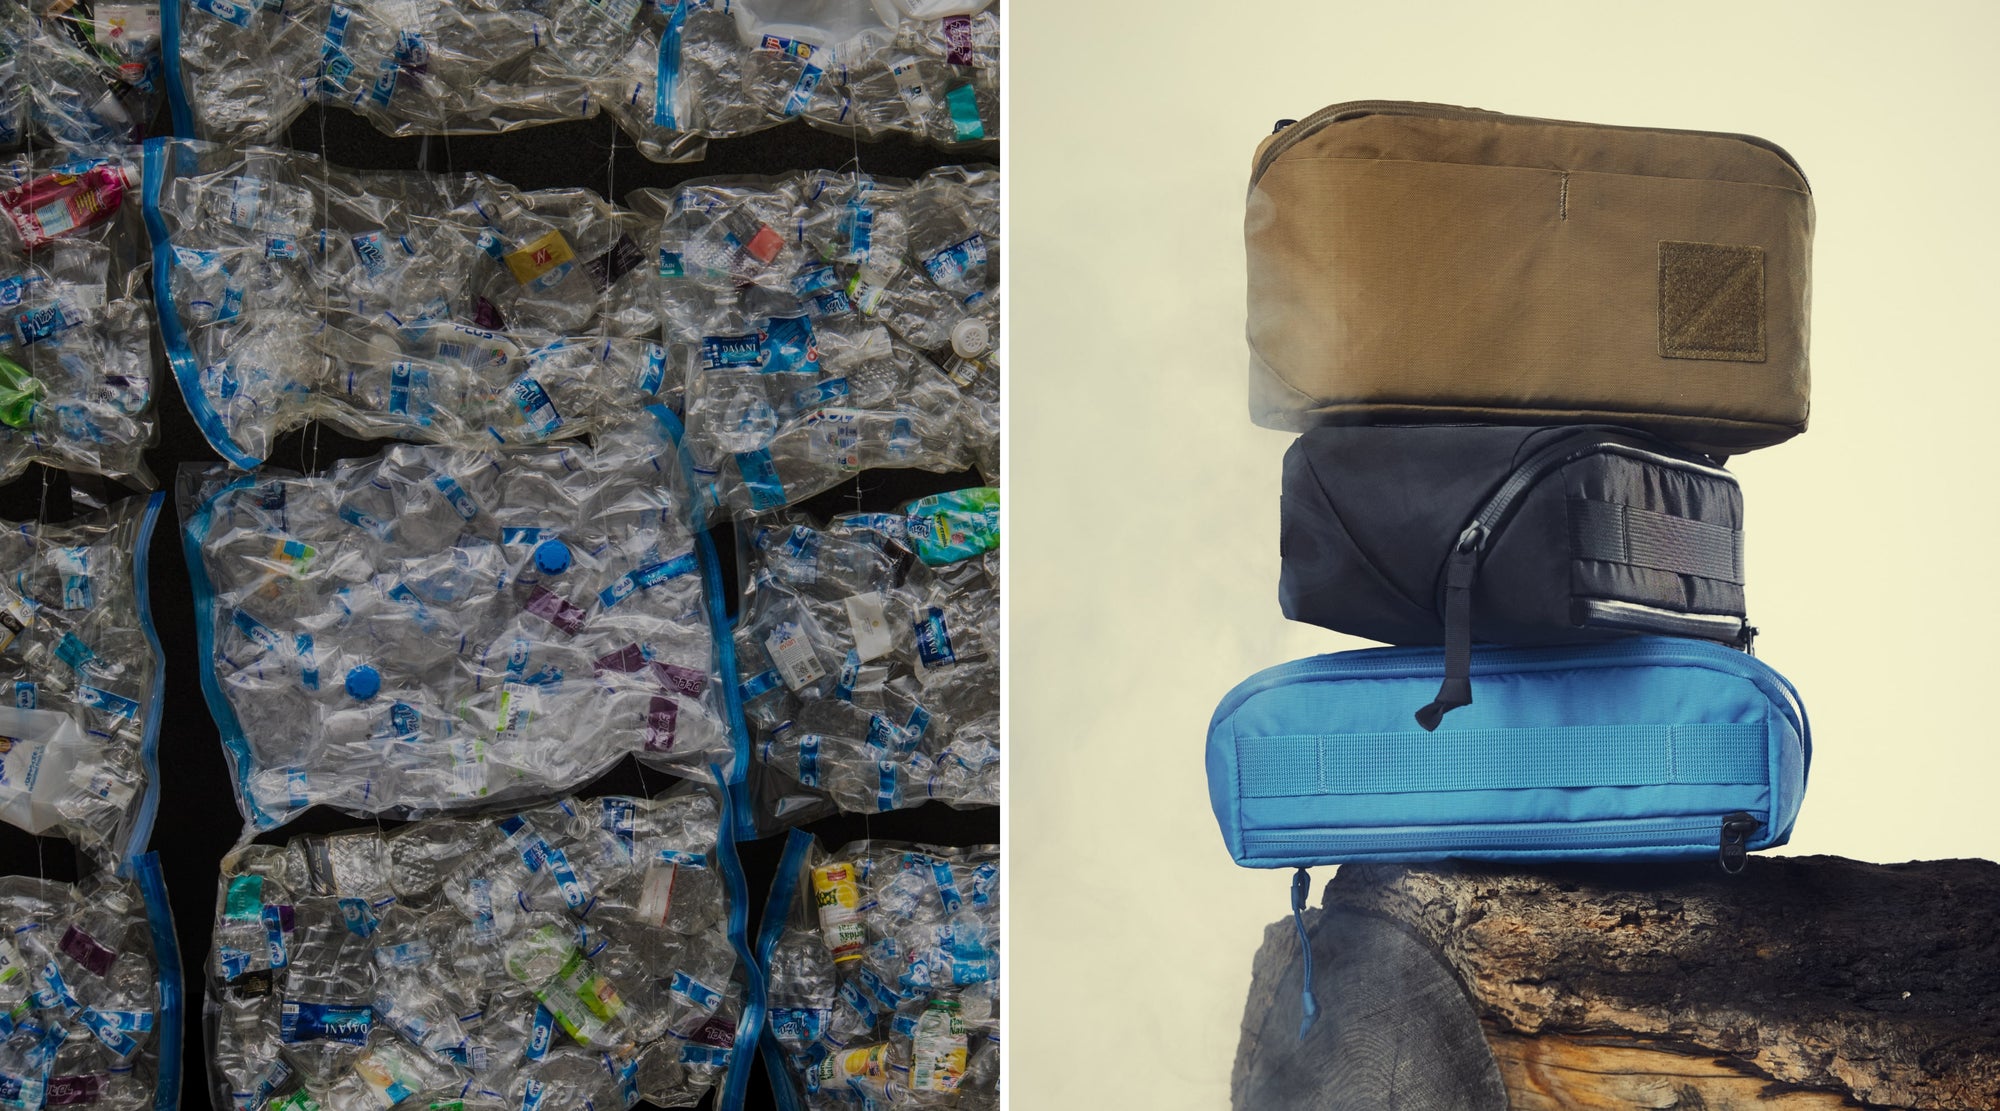 Ecopak is made from plastic bottles - seen next to CAP2